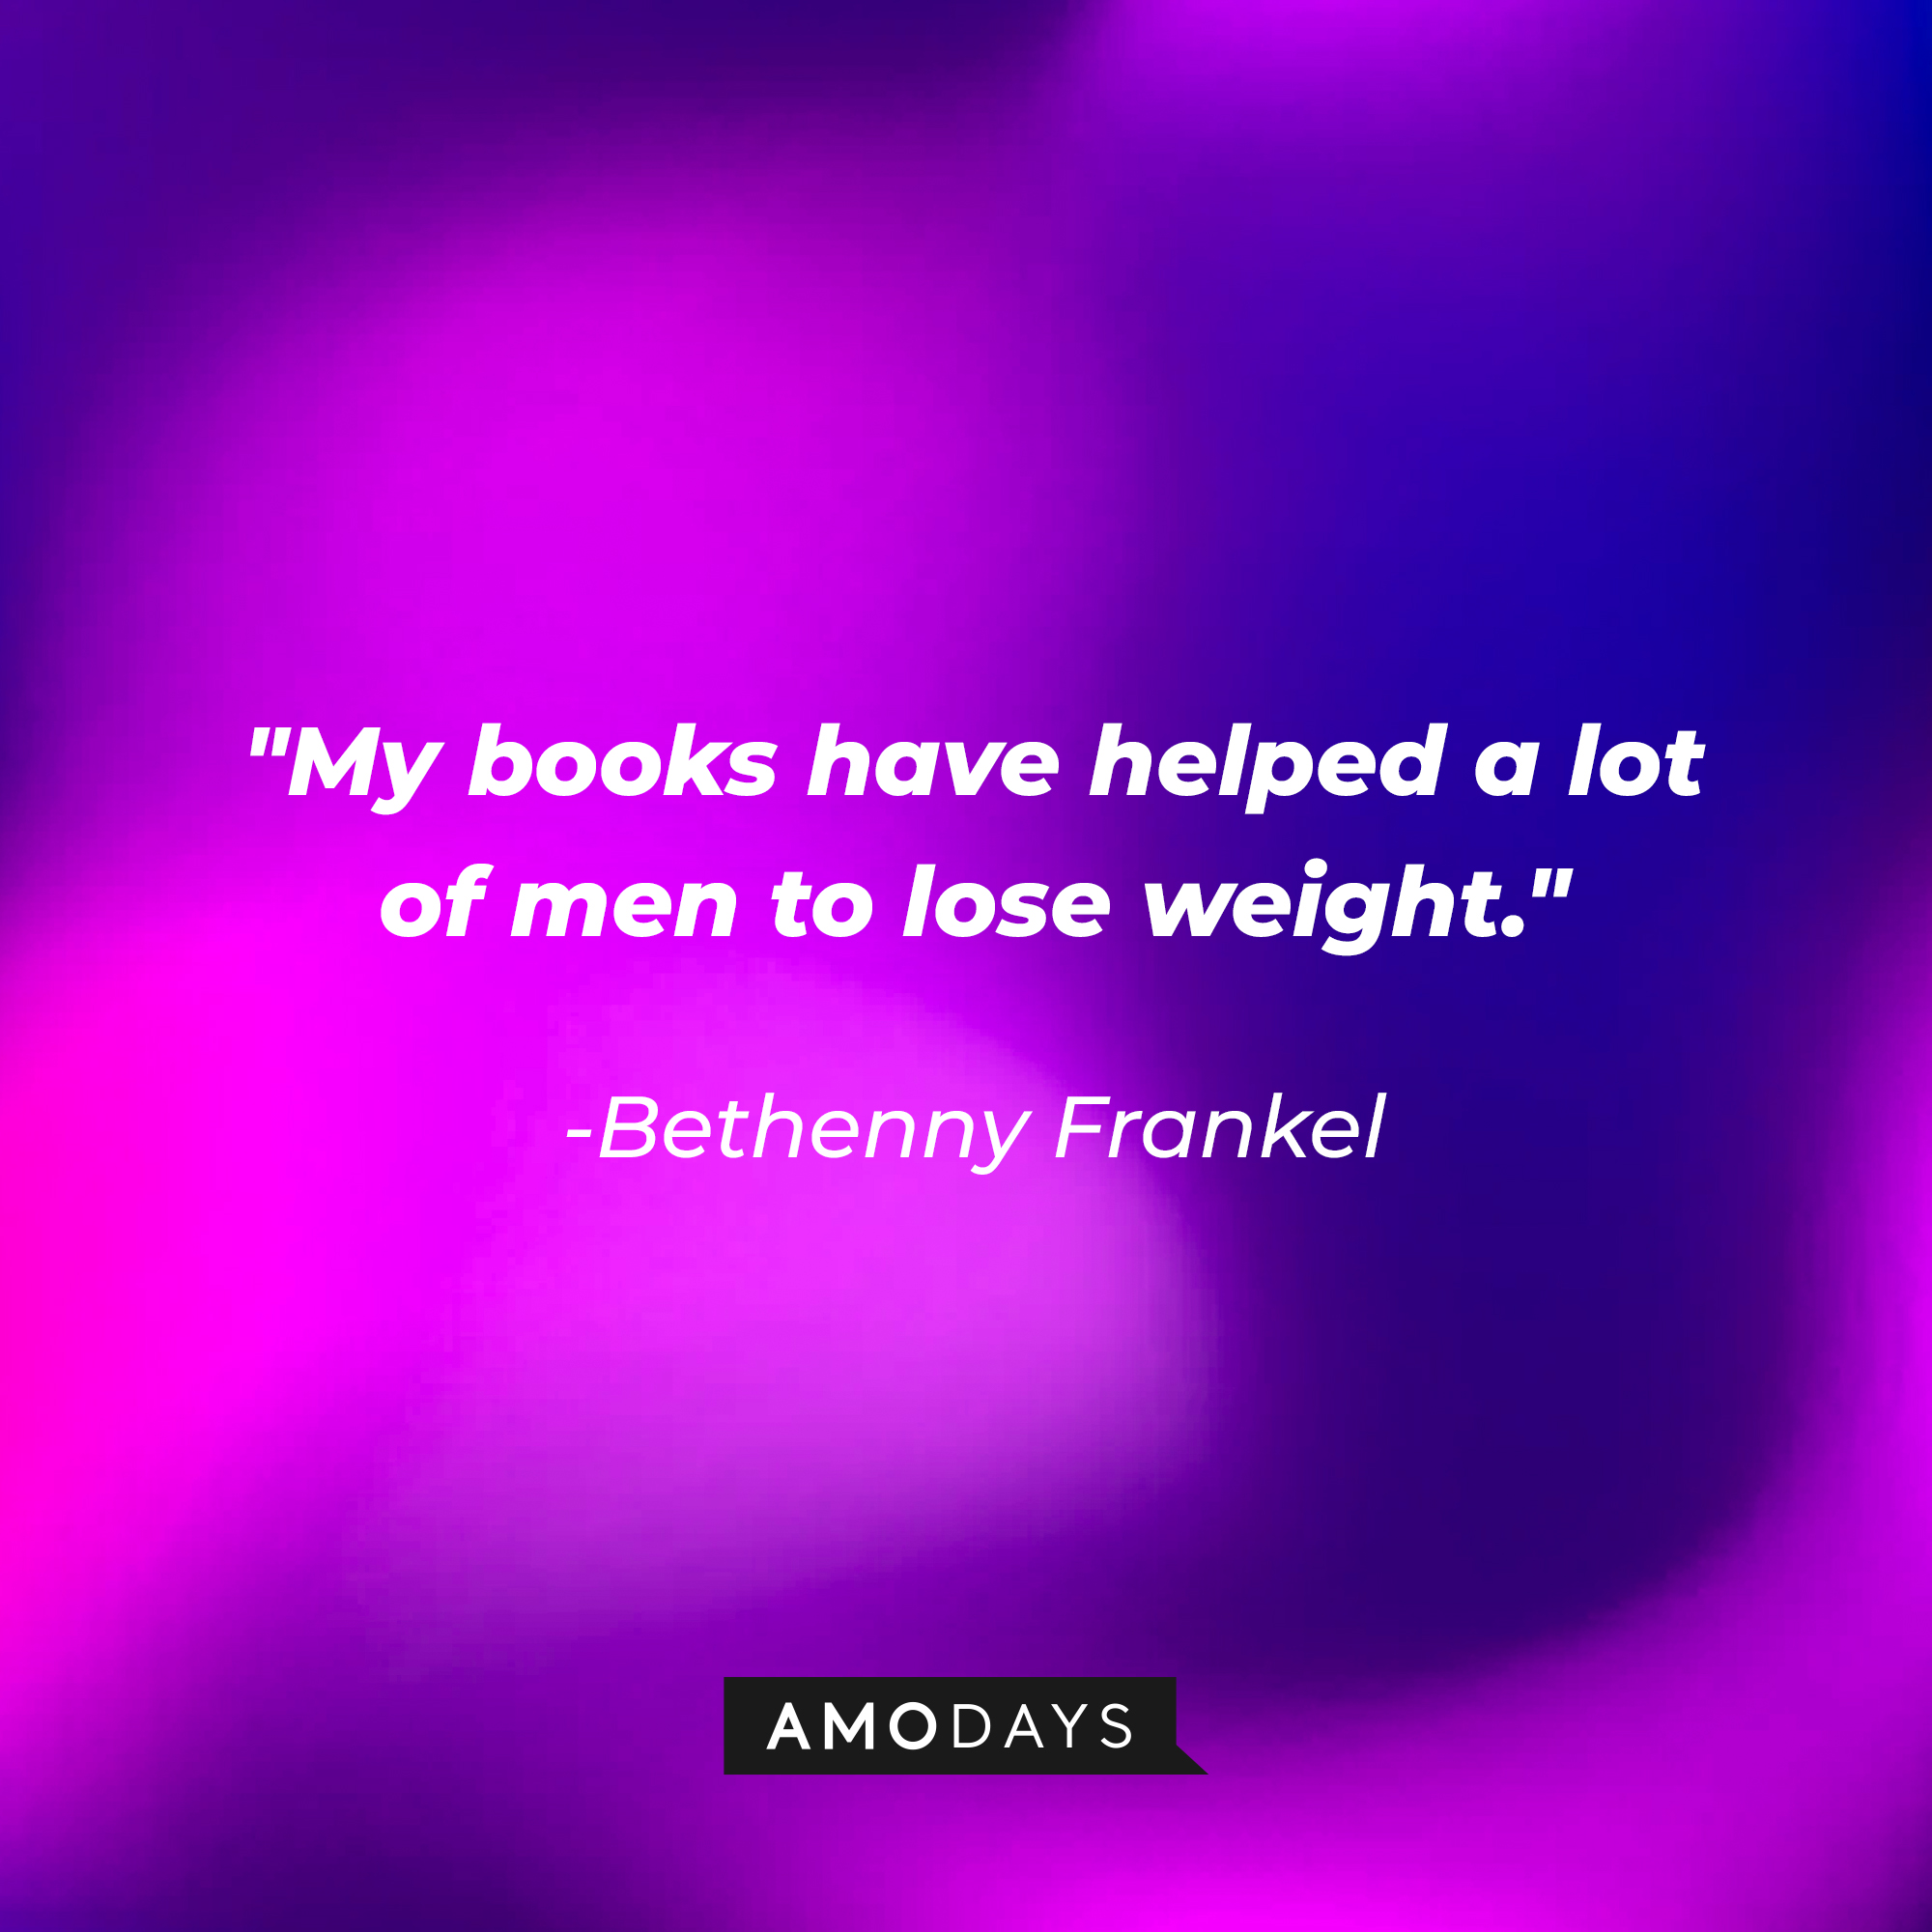 Bethenny Frankel's quote: "My books have helped a lot of men to lose weight." | Source: Amodays